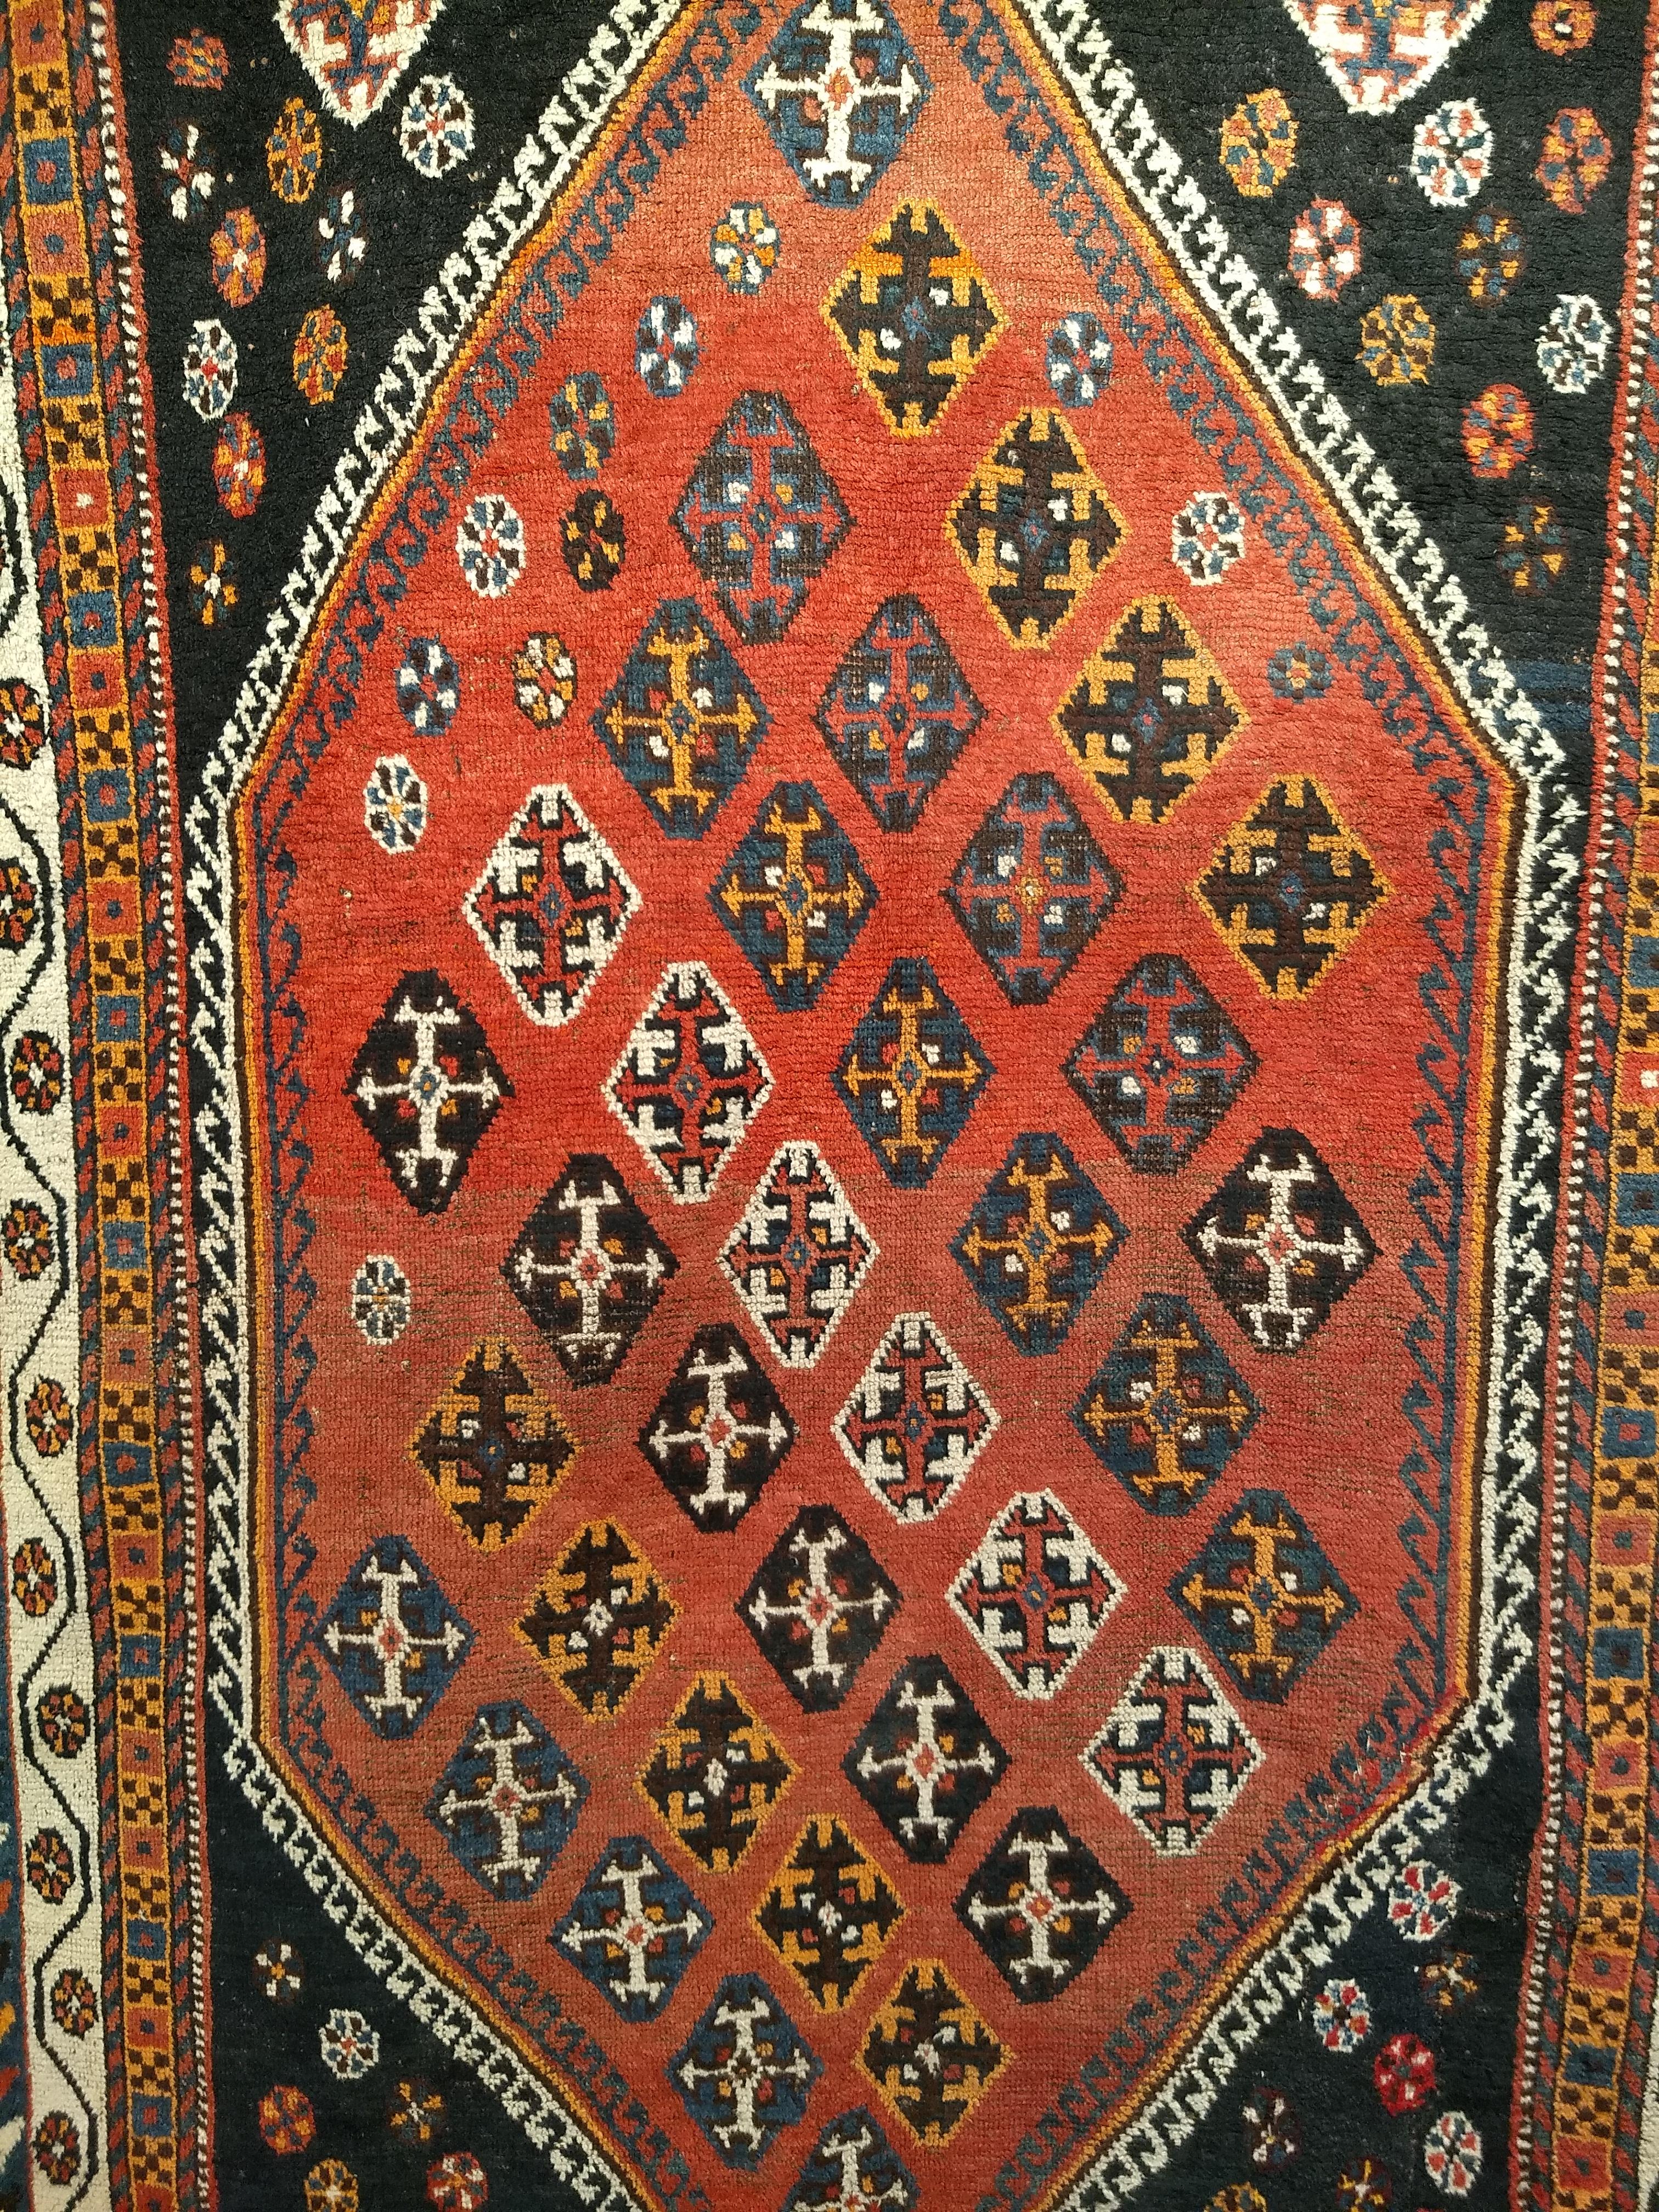 Vintage Persian Qashqai Tribal Area Rug in Rust, Ivory, Blue, Yellow, Black In Good Condition For Sale In Barrington, IL